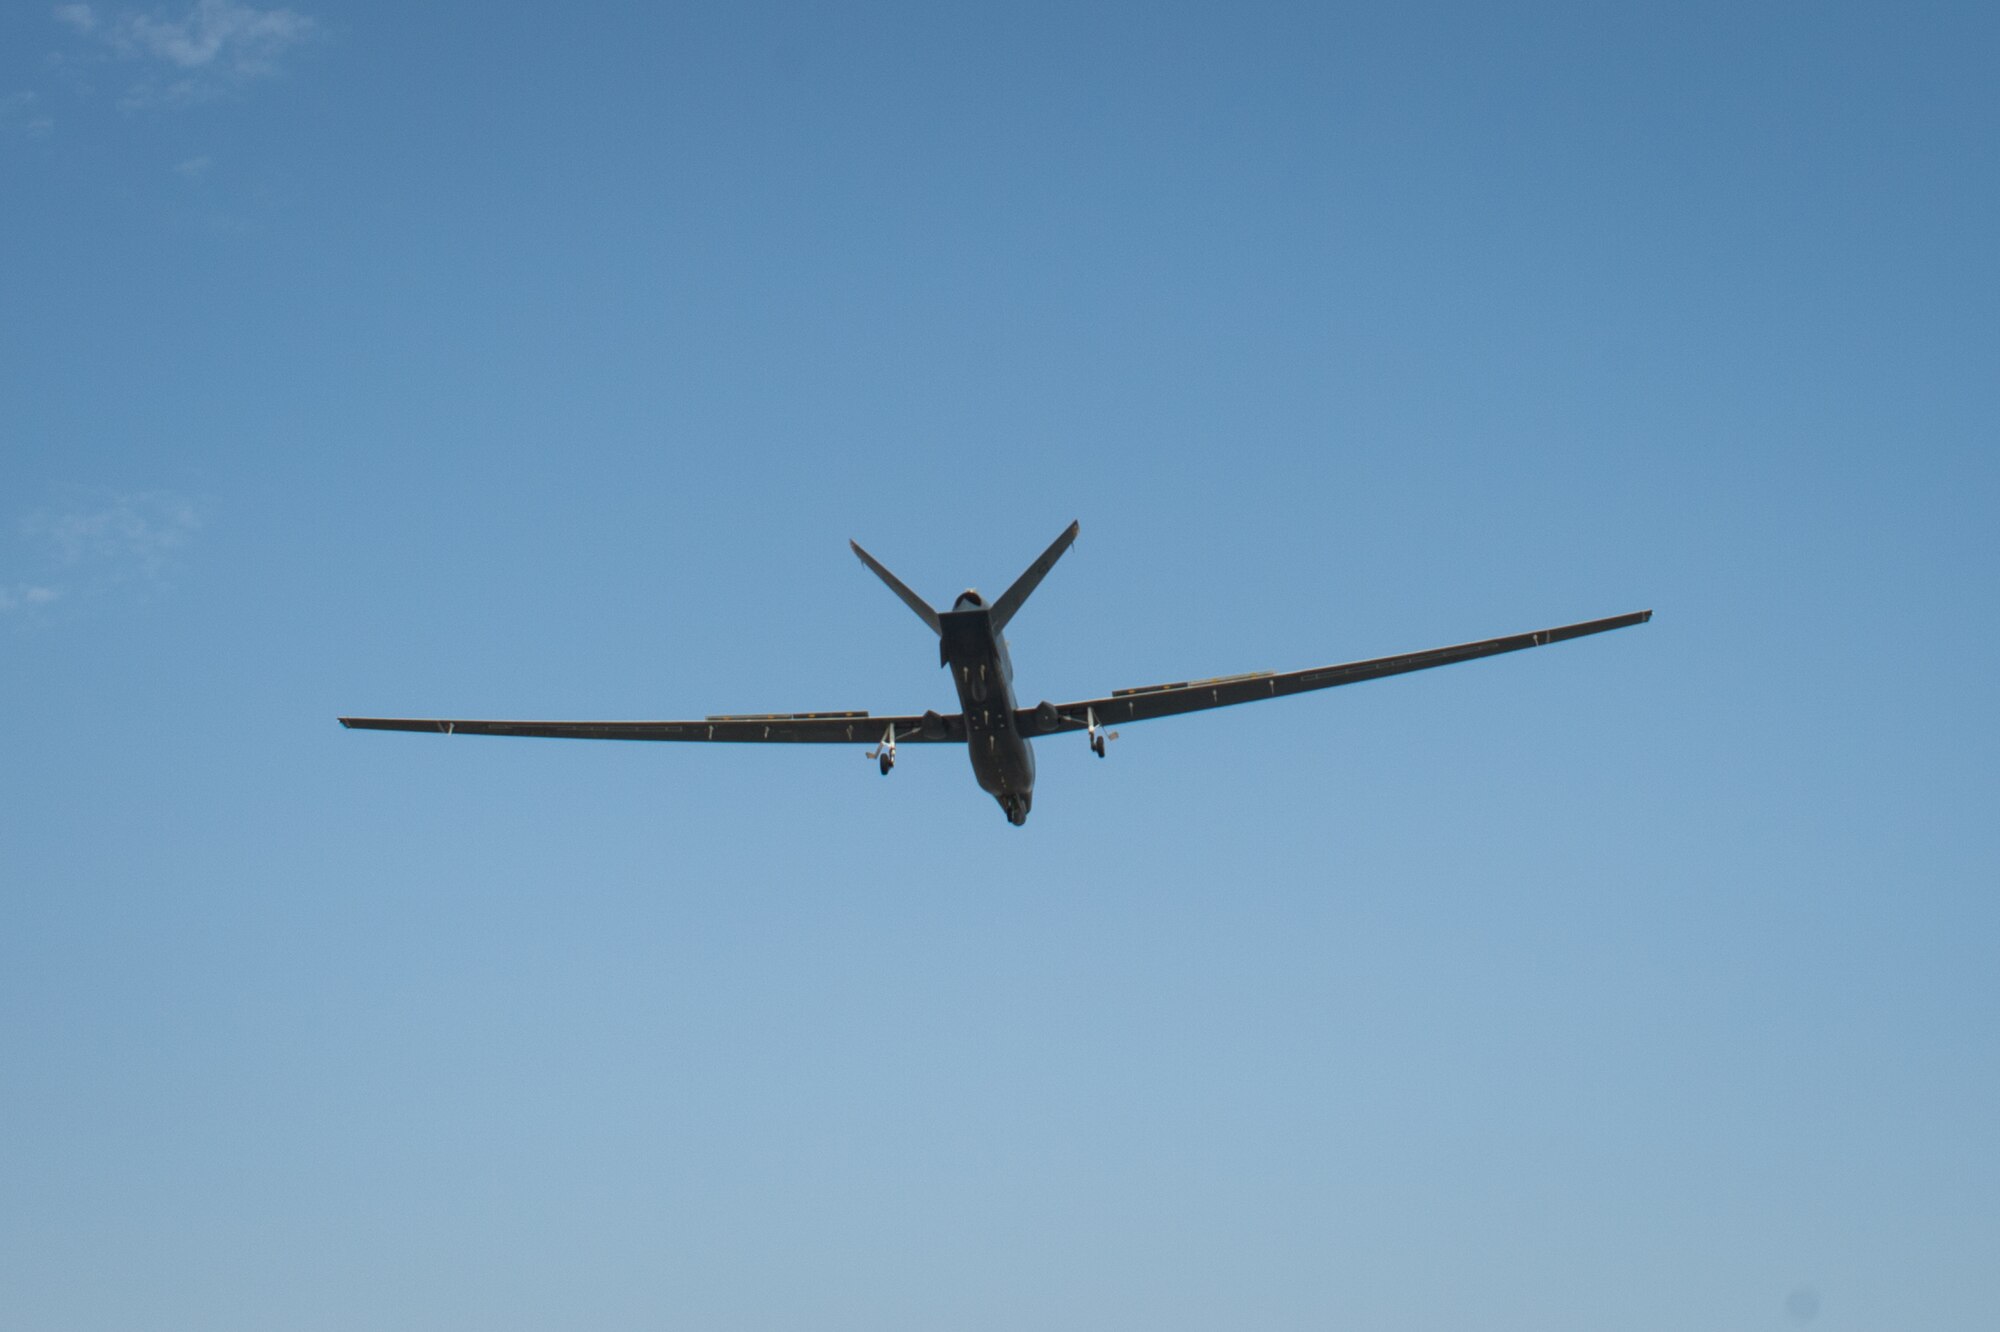 A 380th Air Expeditionary Wing EQ-4 Global Hawk, equipped with a battlefield airborne communications node, prepares to land after completing a sortie in support of Combined Joint Task Force-Operation Inherent Resolve at an undisclosed location in Southwest Asia, April 1, 2017. The successful completion of this sortie marked 1000 in a row for the BACN Global Hawks. (U.S. Air Force/Senior Airman Tyler Woodward)